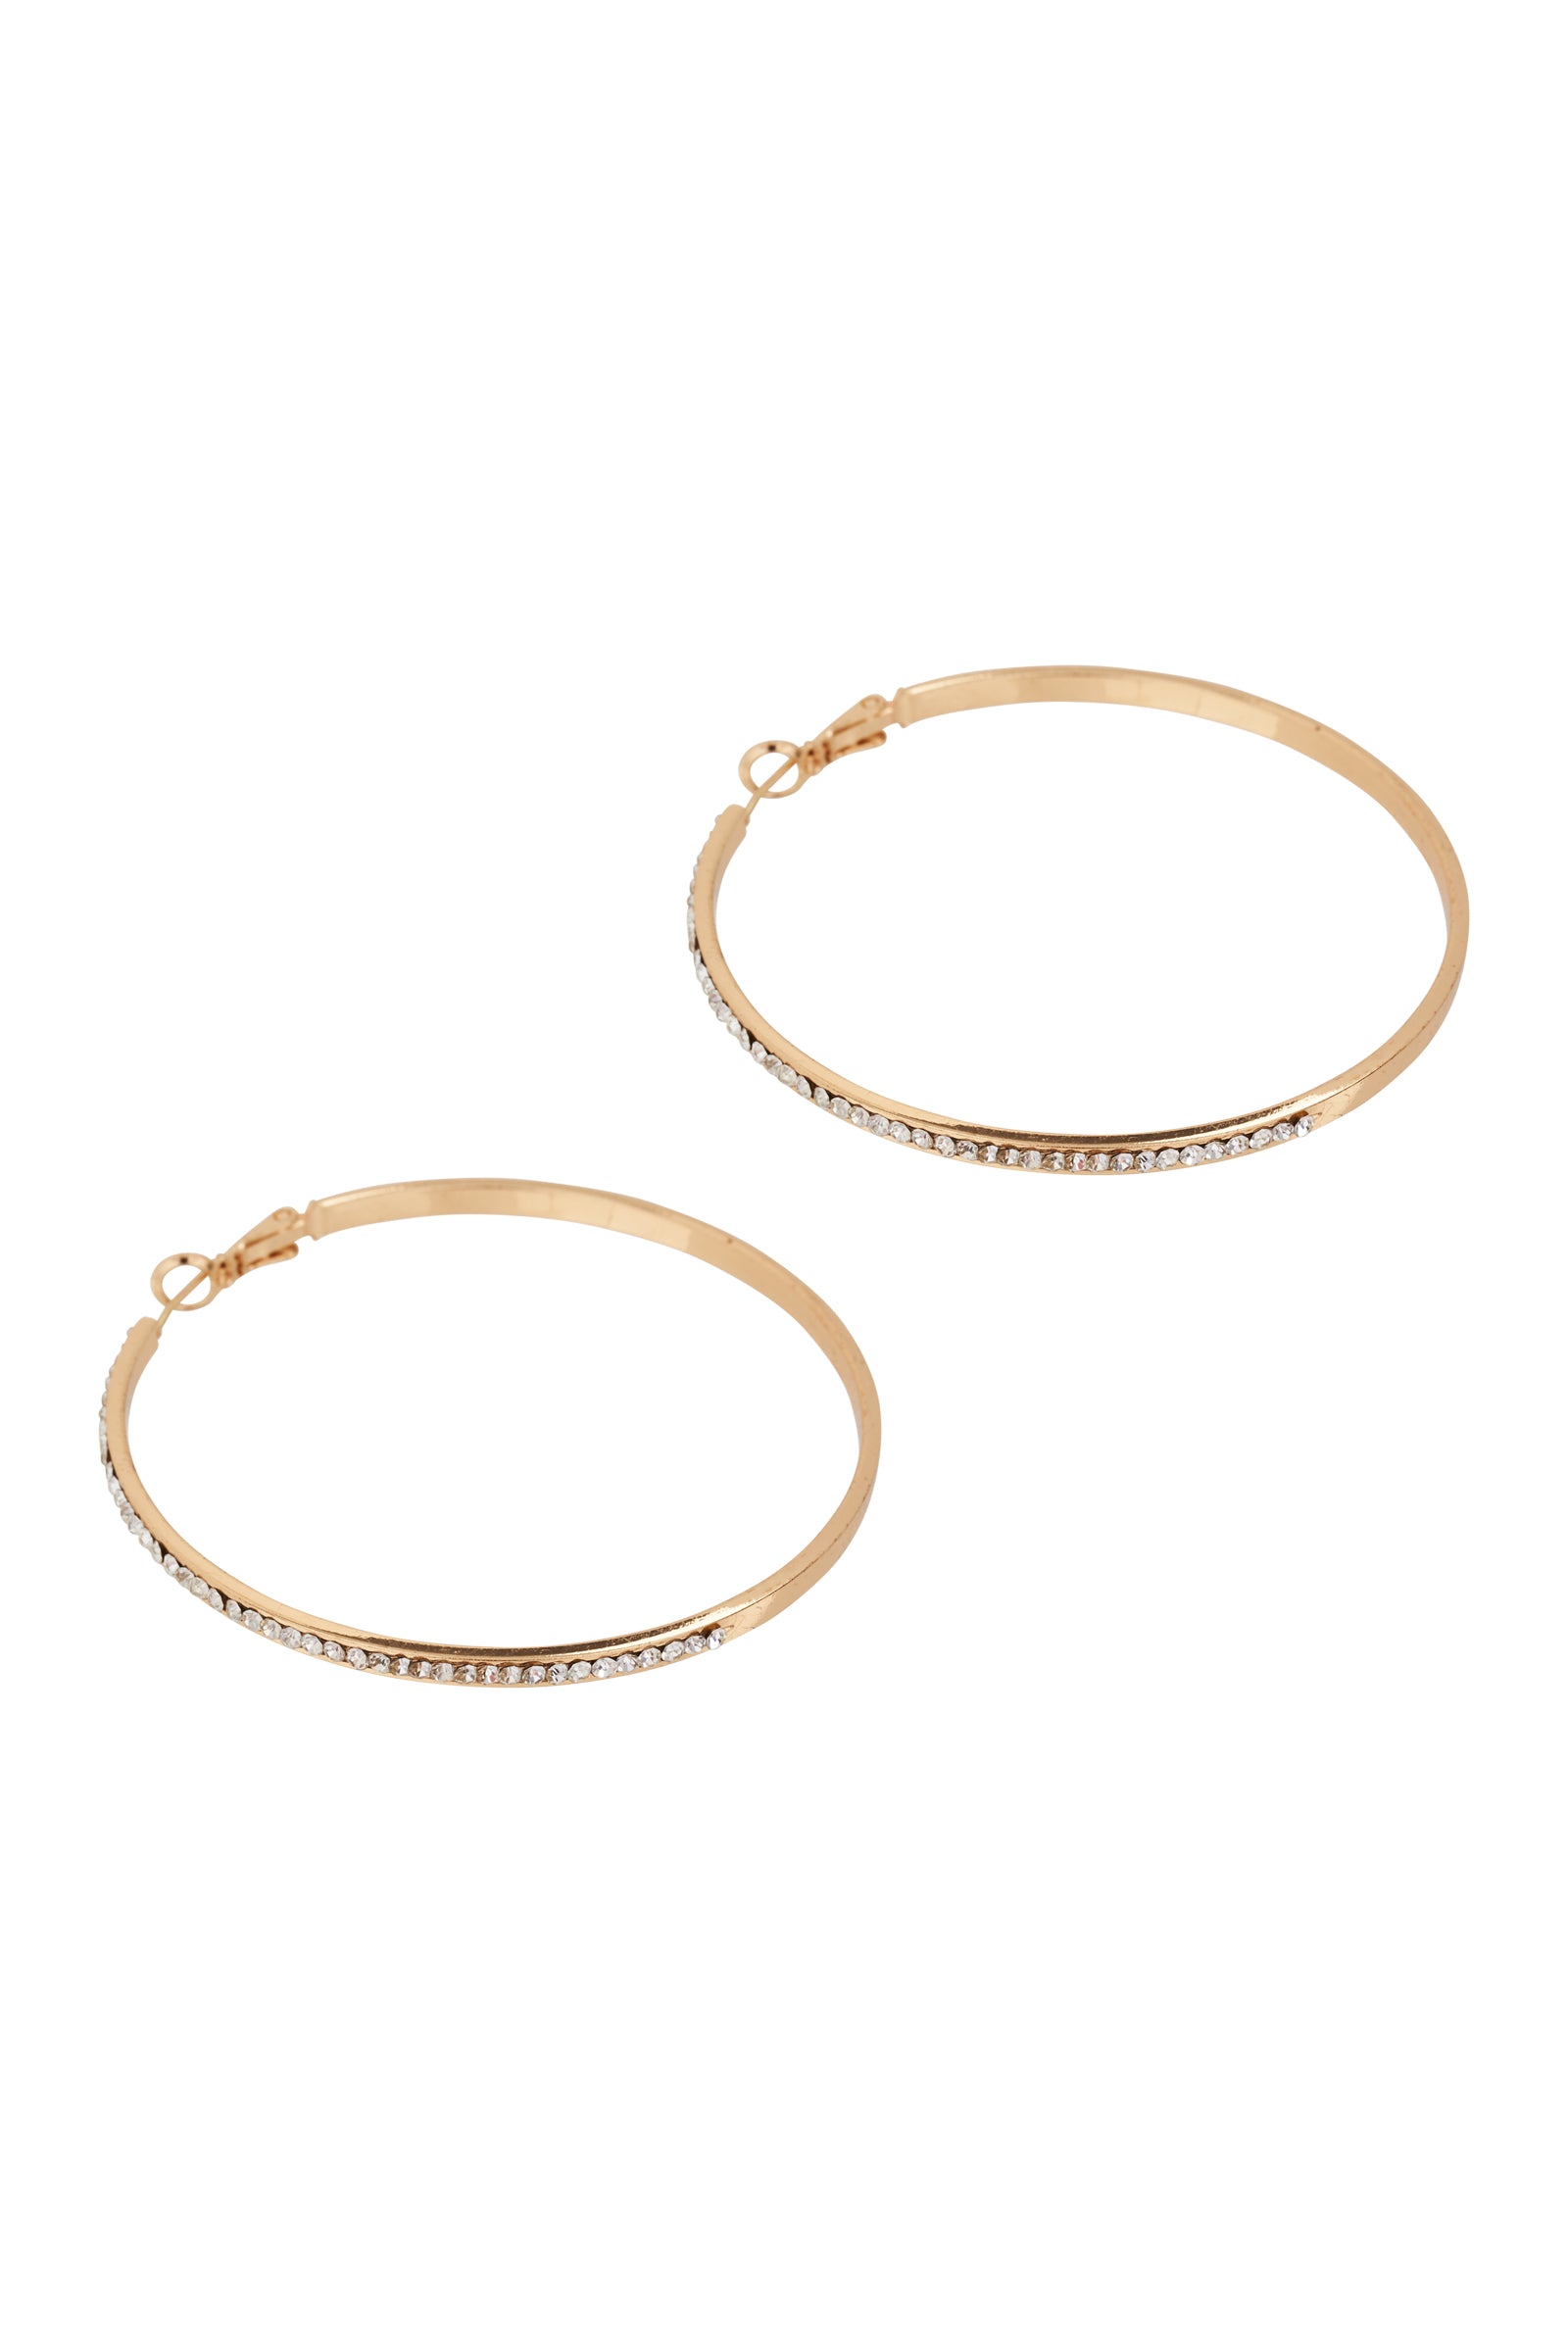 Norse Diamante Hoop - Gold - eb&ive Earring